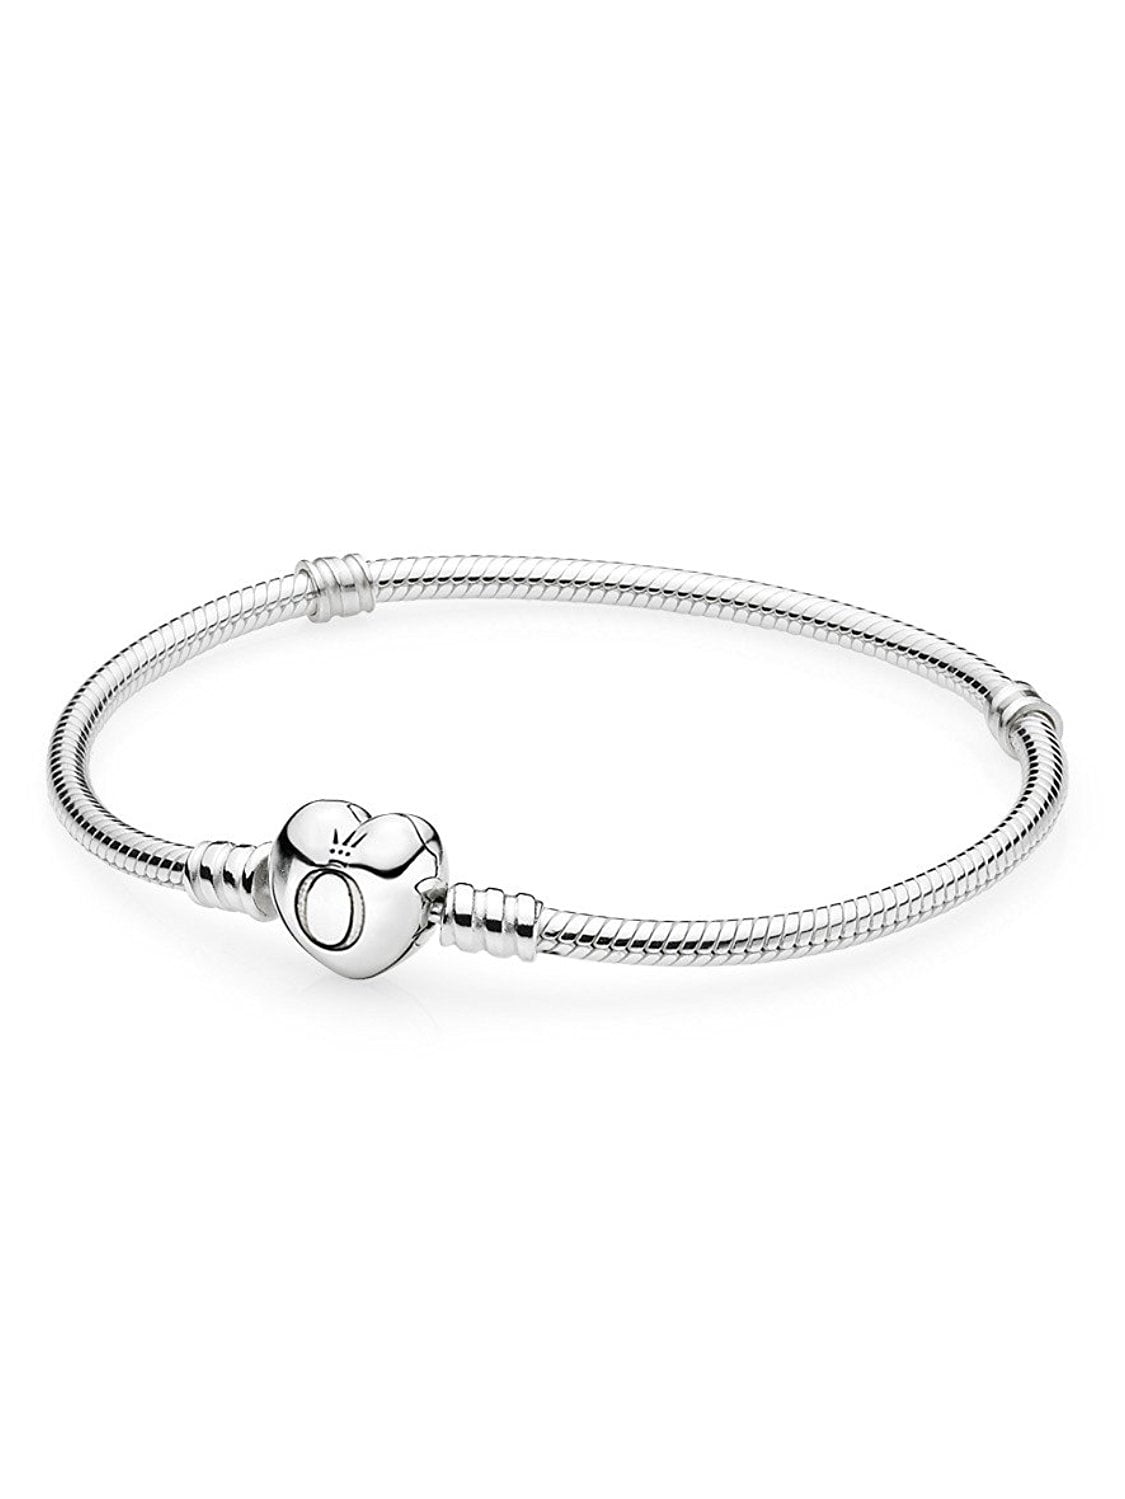 Pandora Moments Silver Charm Bracelet With Heart Clasp 590719-23 -